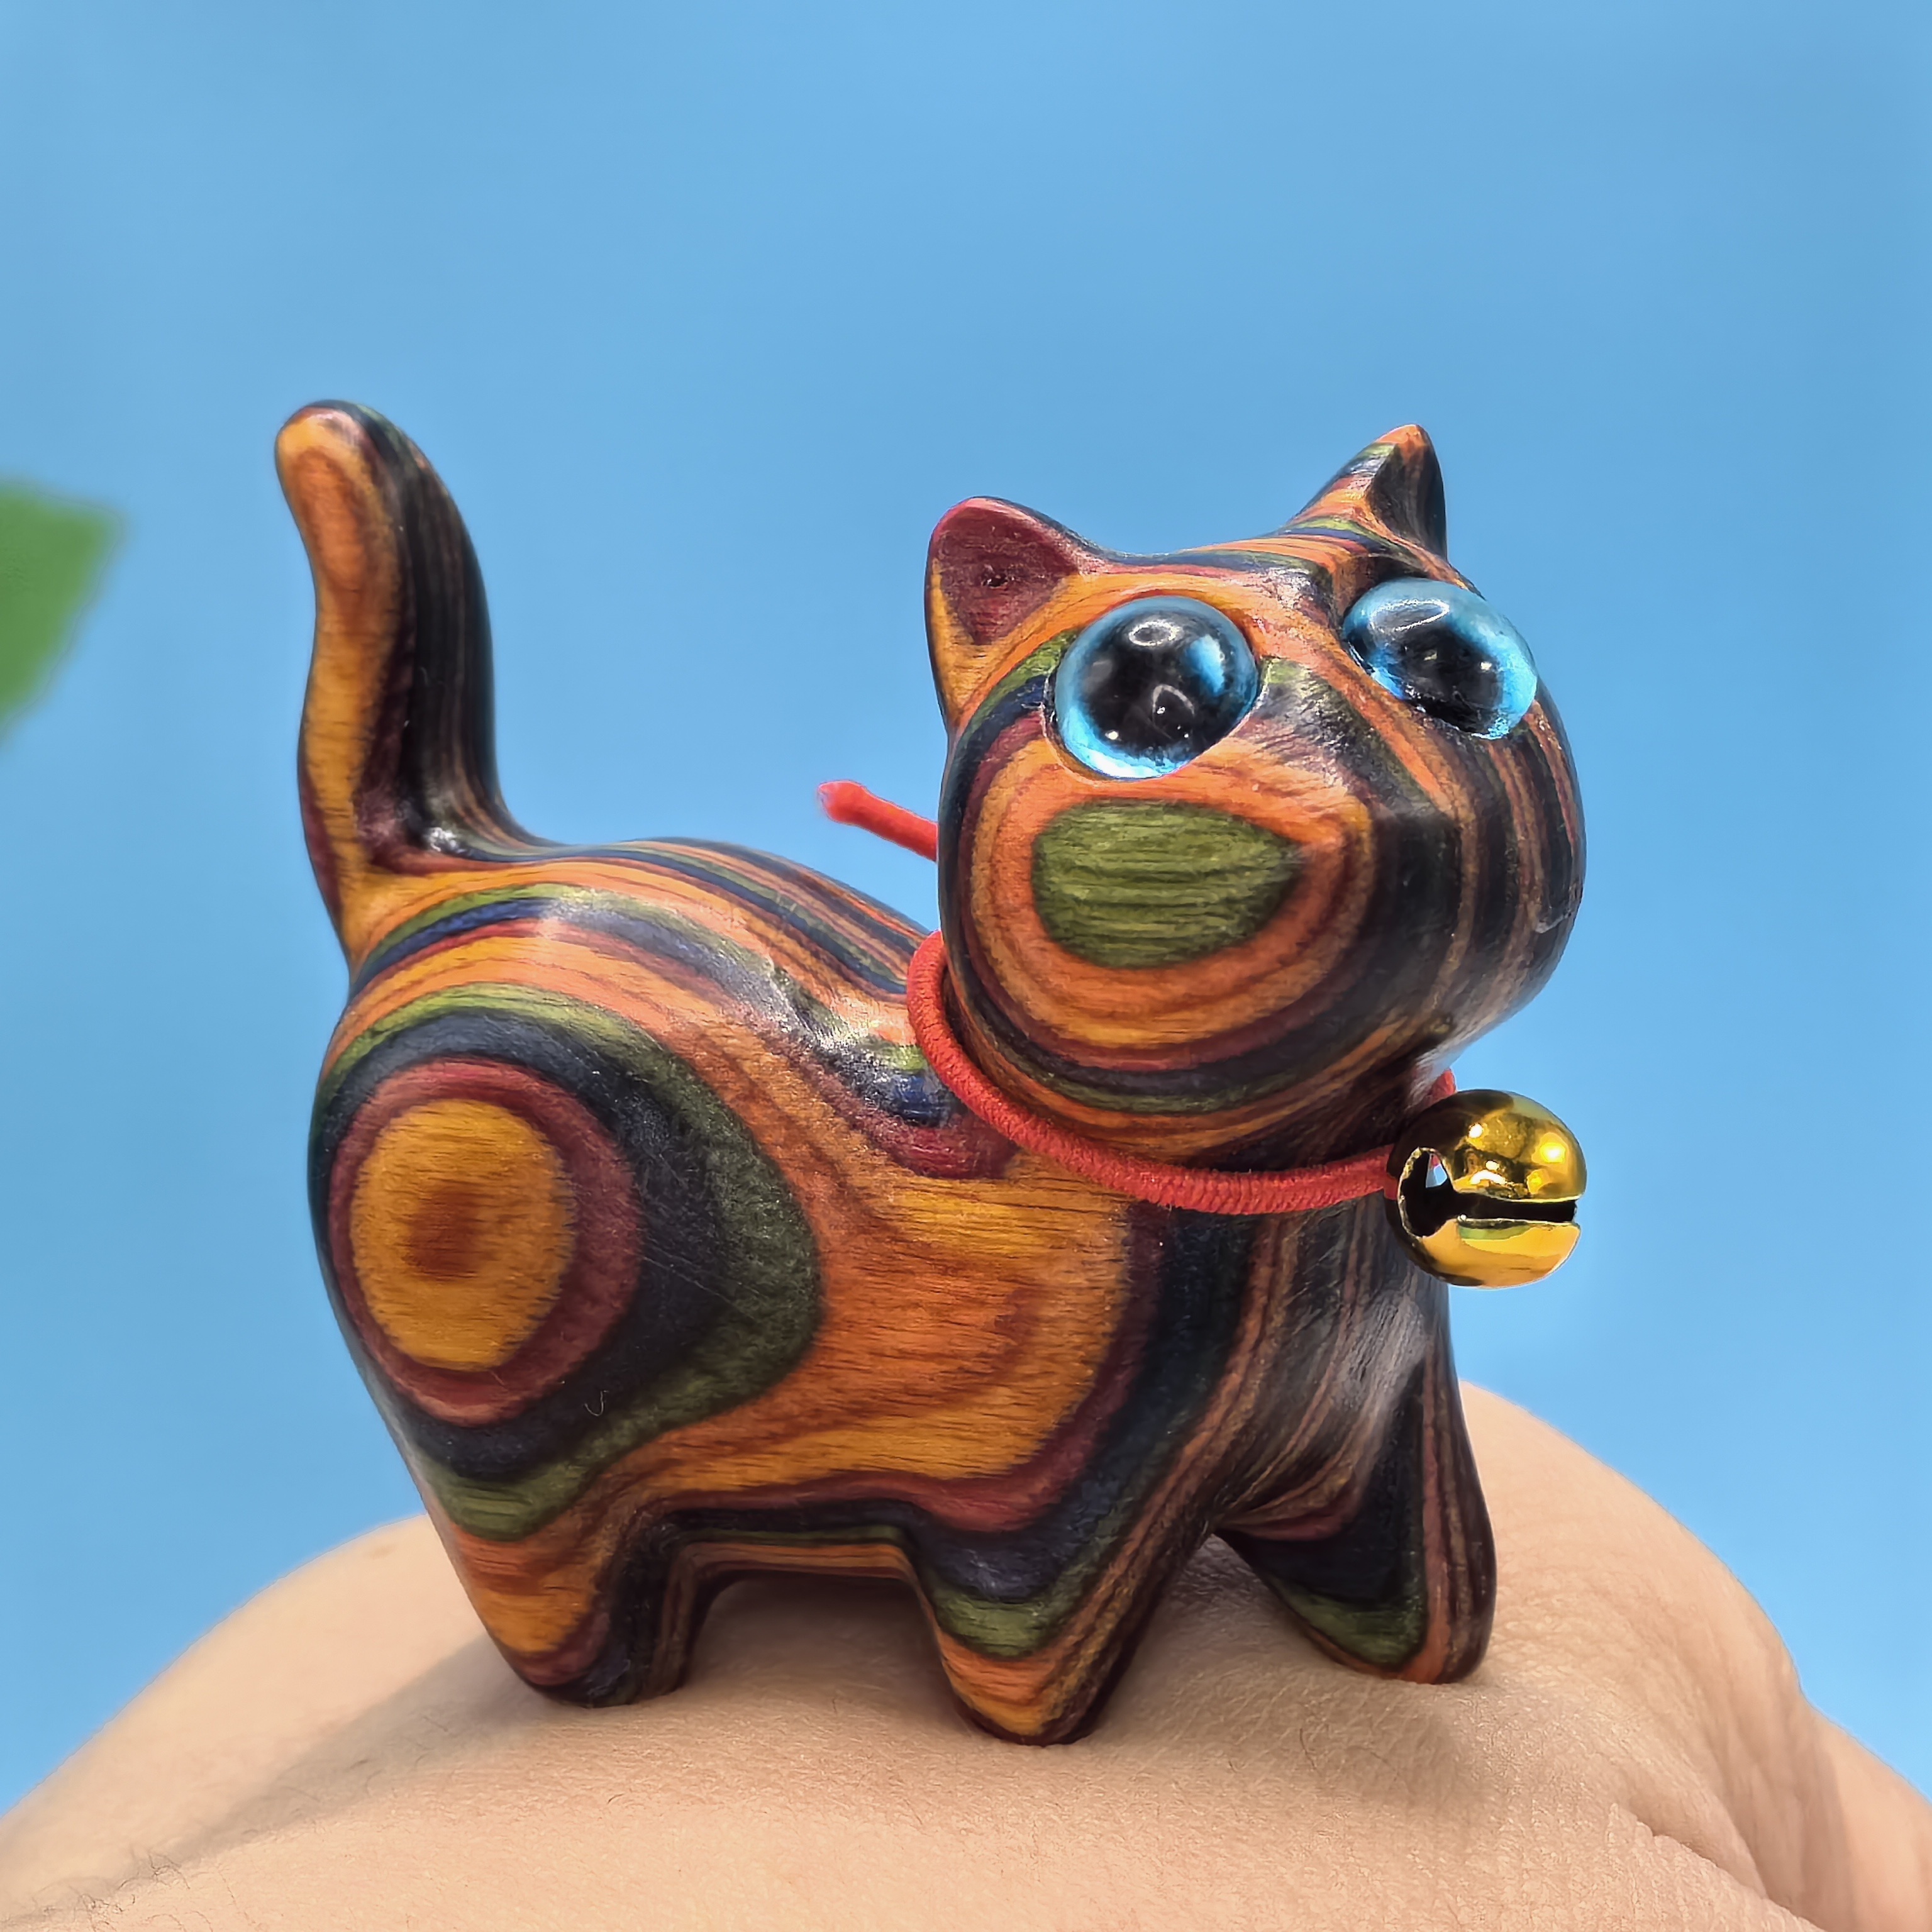 

Charming Wooden Kitty Figurine: A Unique Art Piece For Home Decor - Handcrafted With Natural Wood Grain Patterns